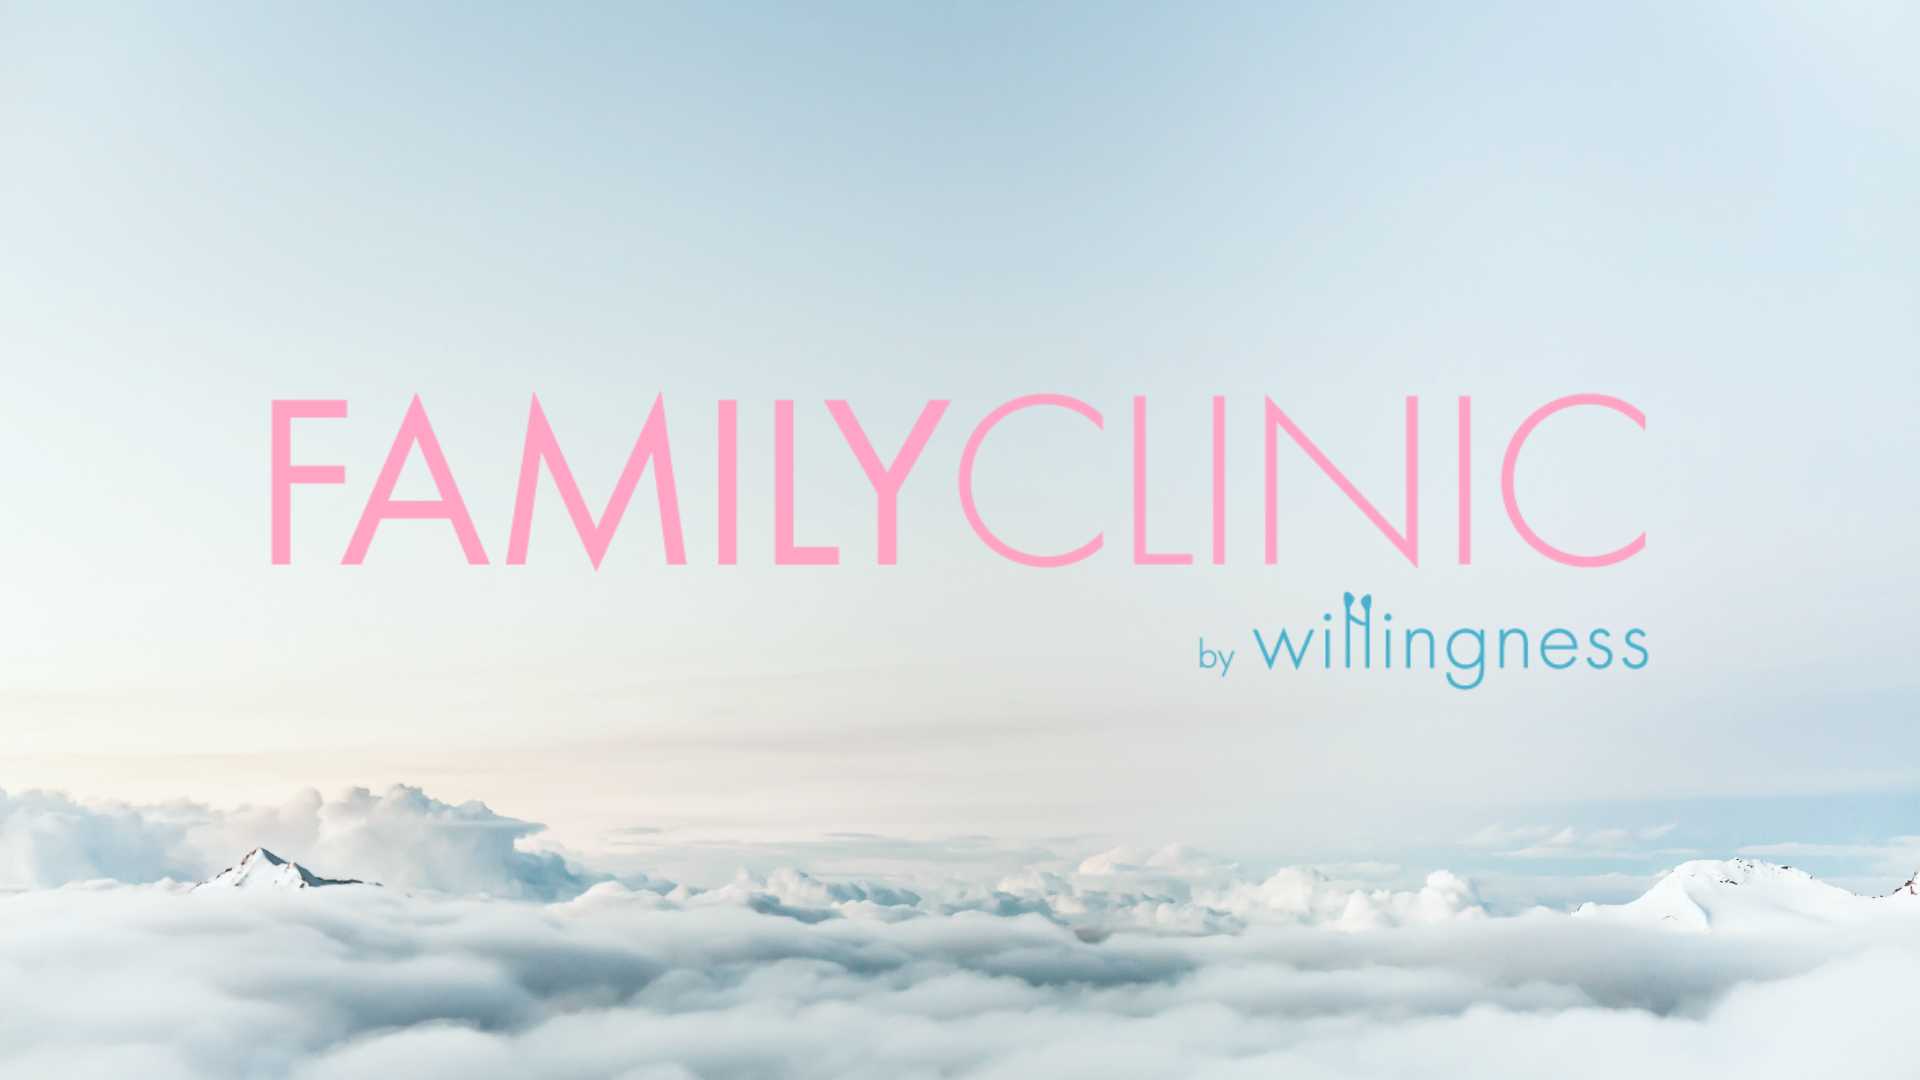 family clinic logo, a subbrand by Willingness. The background is a blue sky with clouds